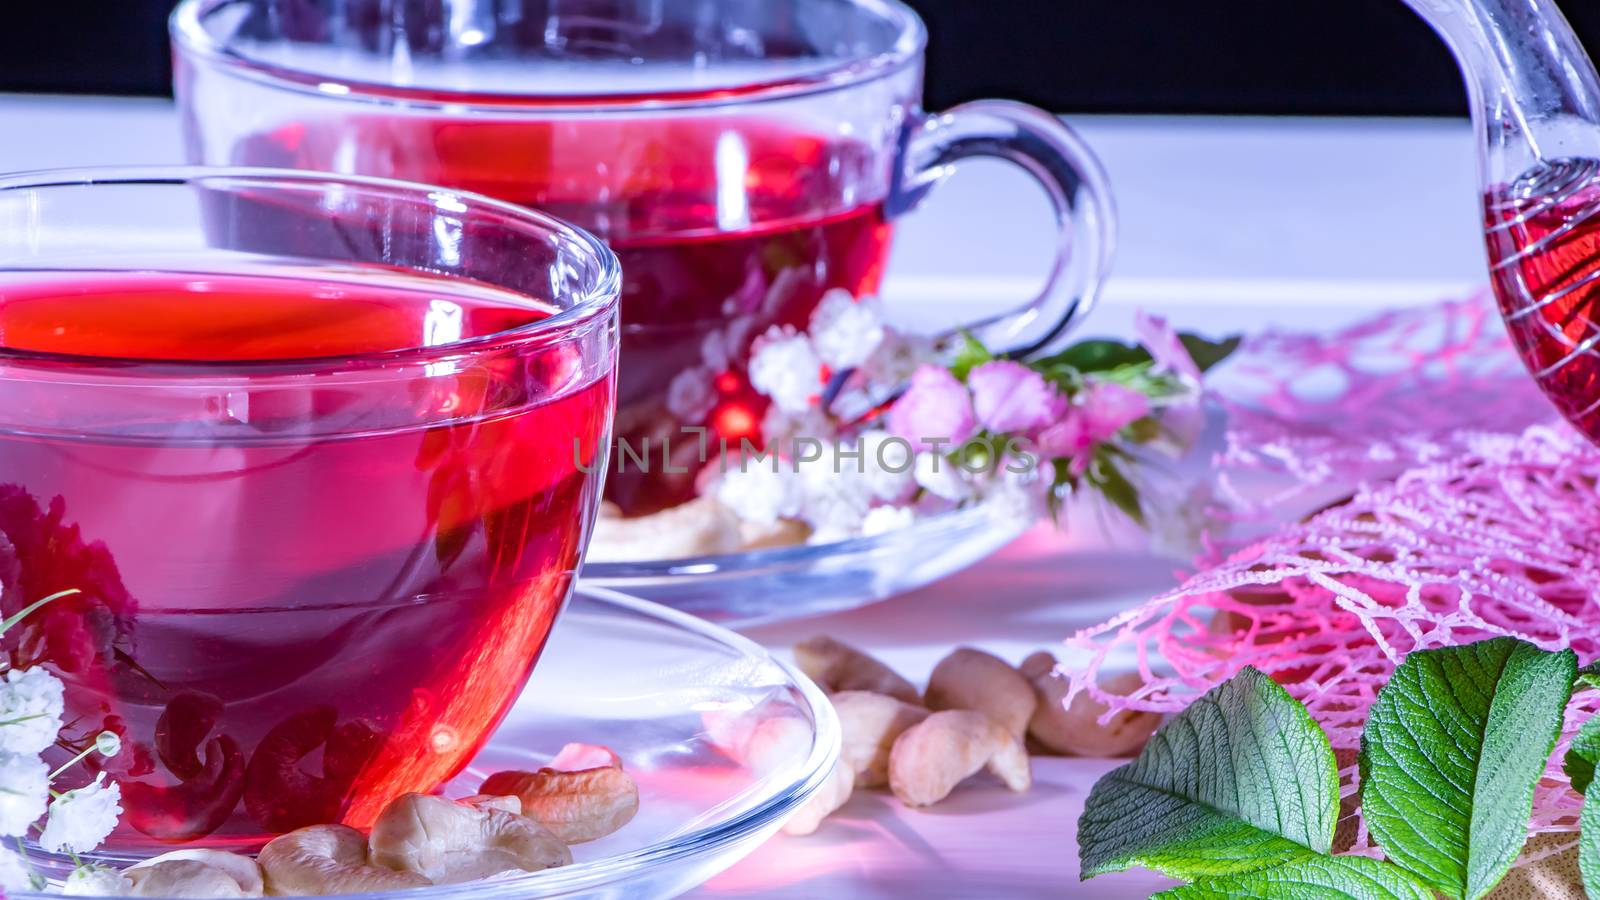 Red hot hibiscus tea in glass mug. Tea time: cup of tea, carcade, karkade, rooibos. Oriental, cozy, ceremony, tradition, japanese, leafy, hygge, autumn, 5 o'clock, afternoon tea